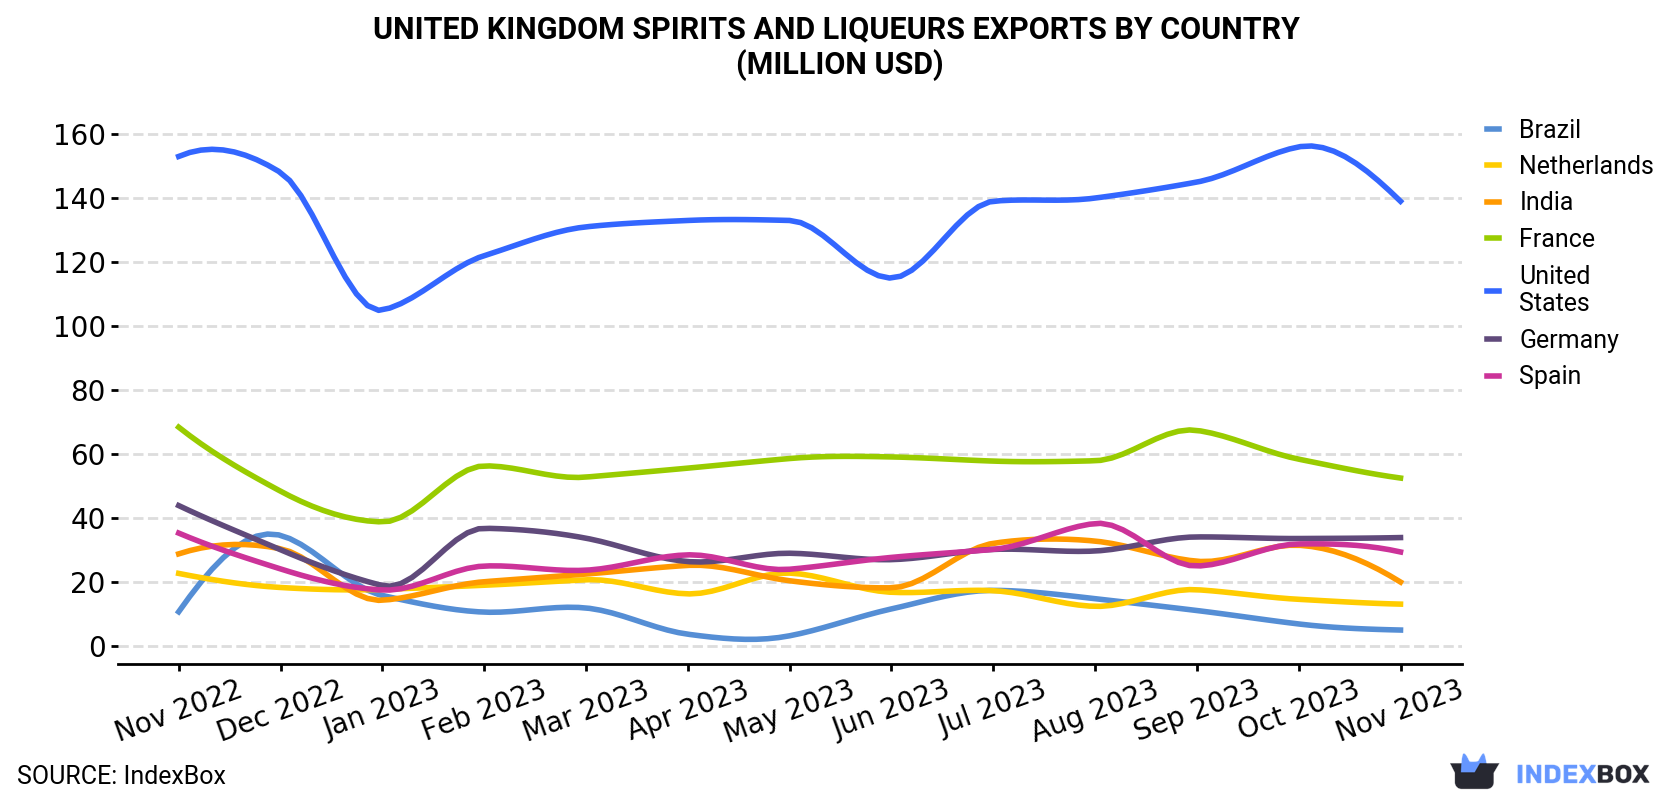 United Kingdom Spirits And Liqueurs Exports By Country (Million USD)